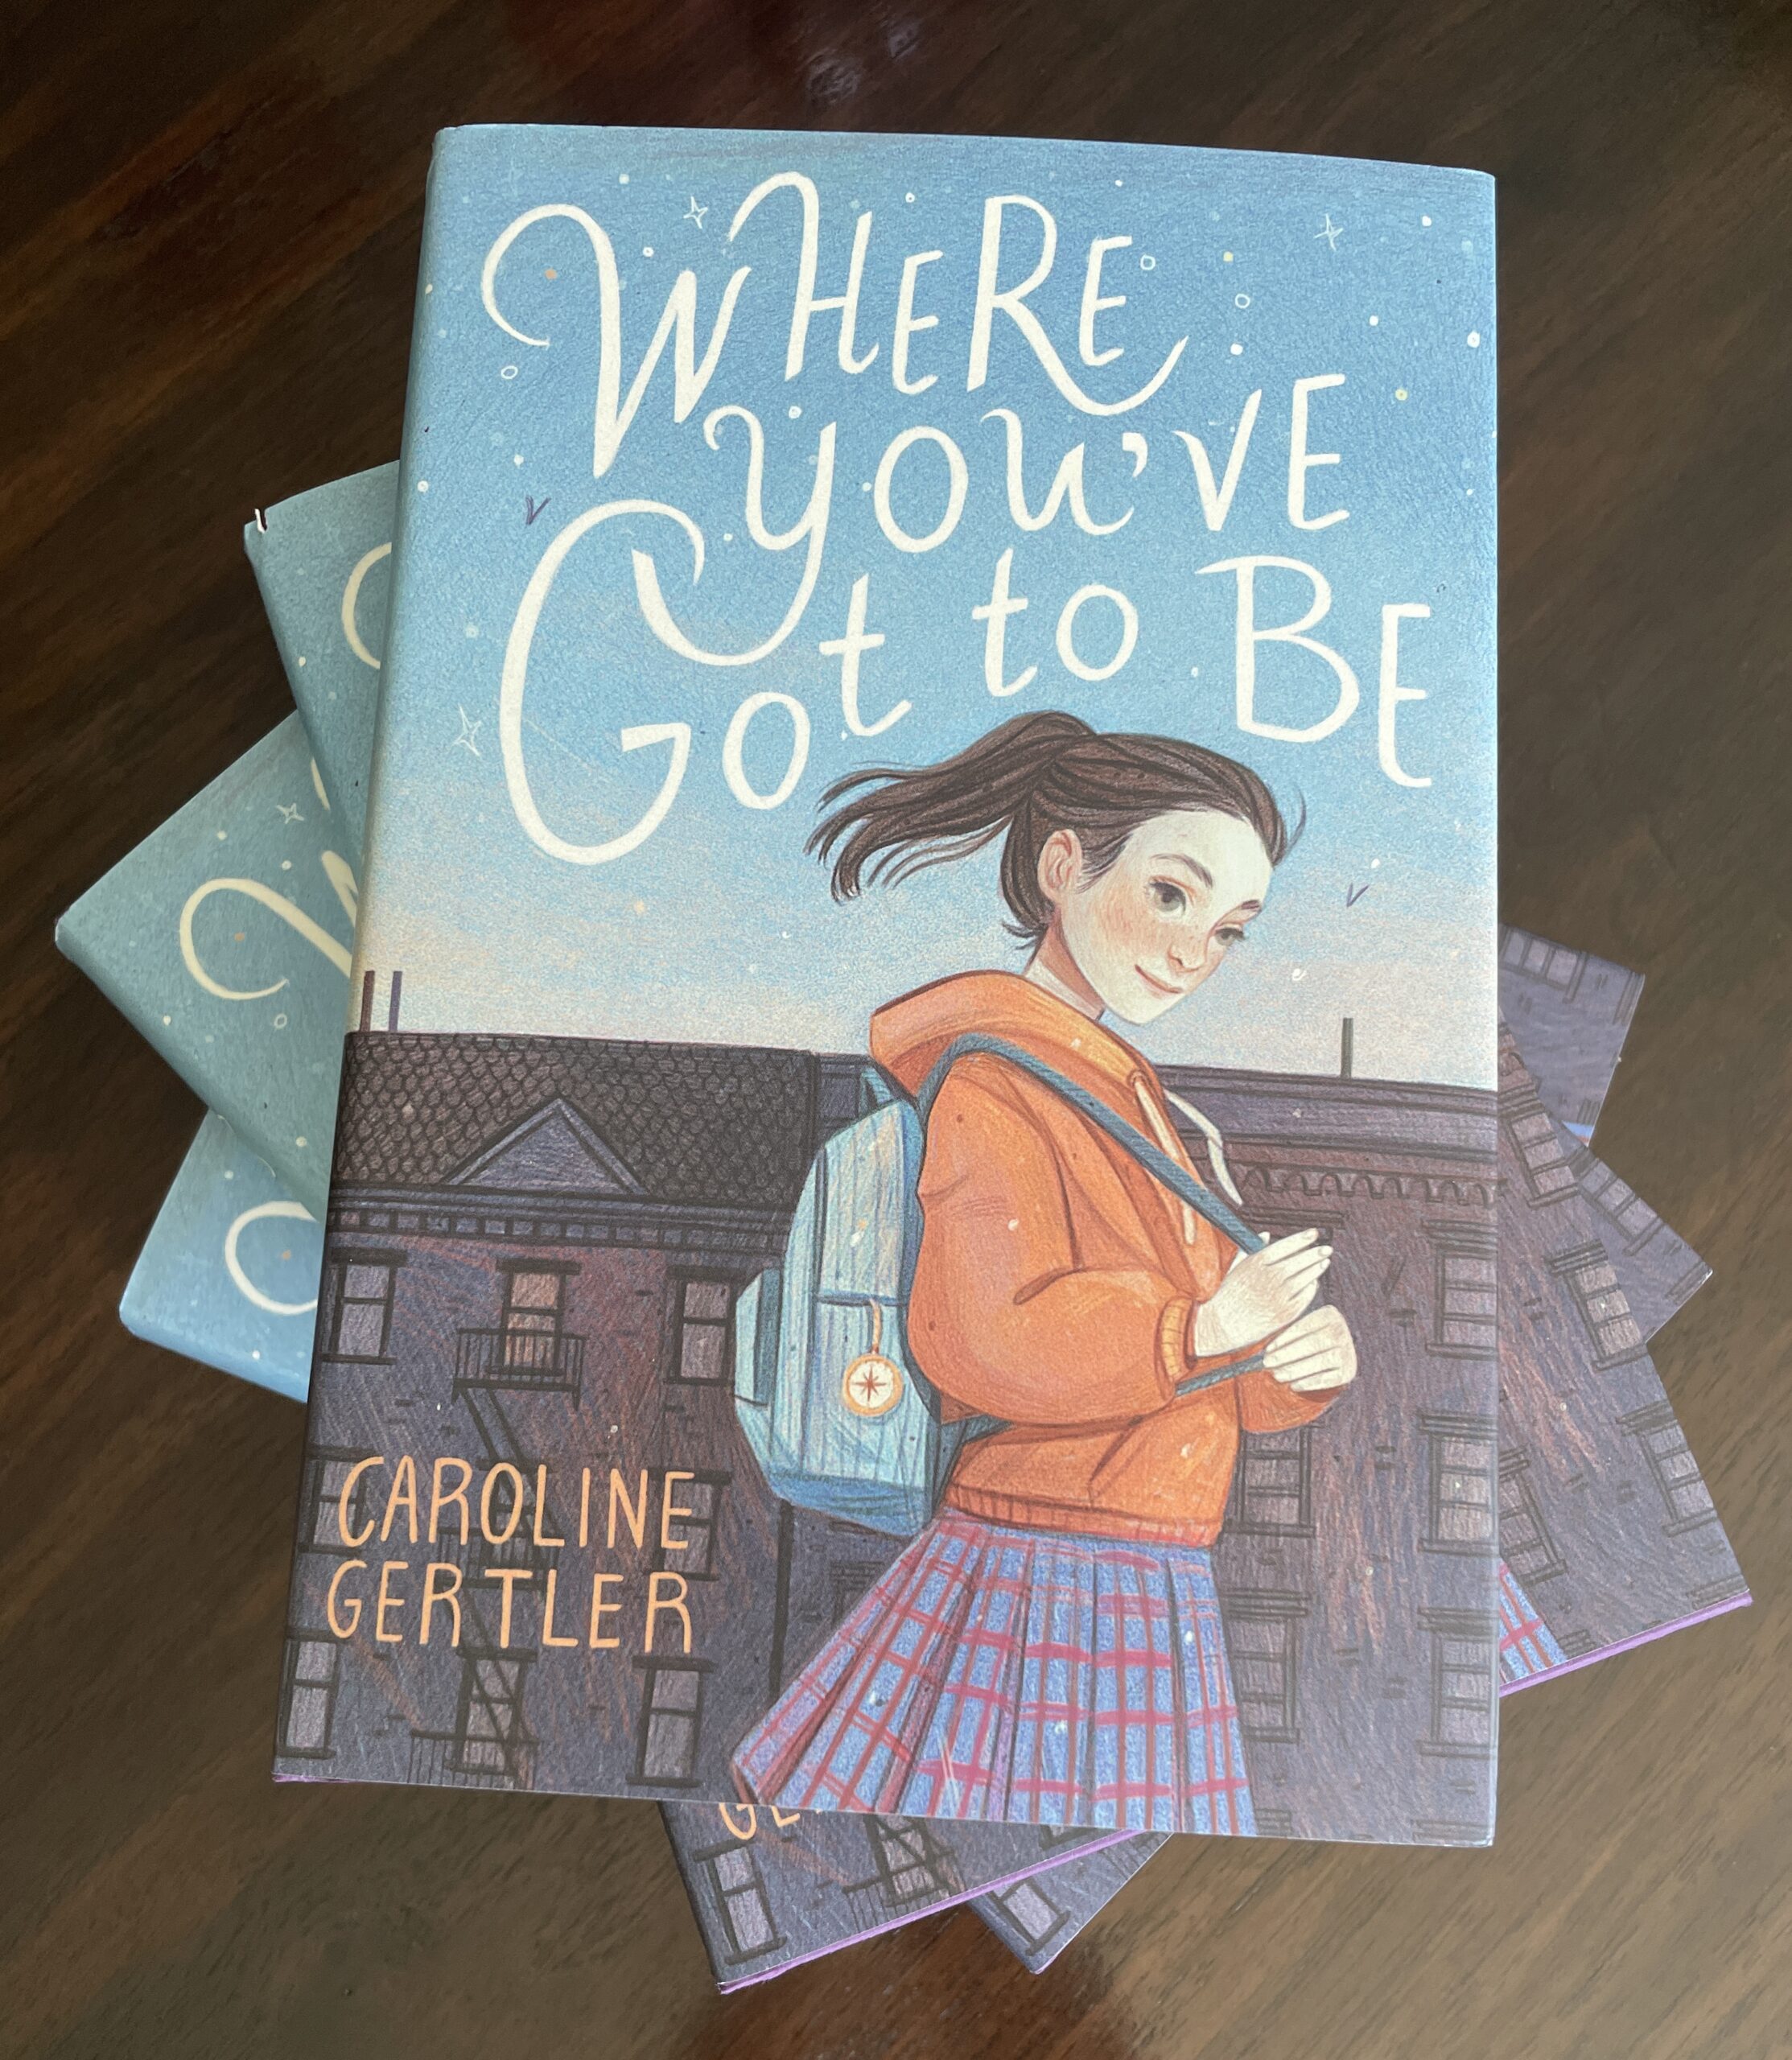 Finding Your Place by Author Caroline Gertler